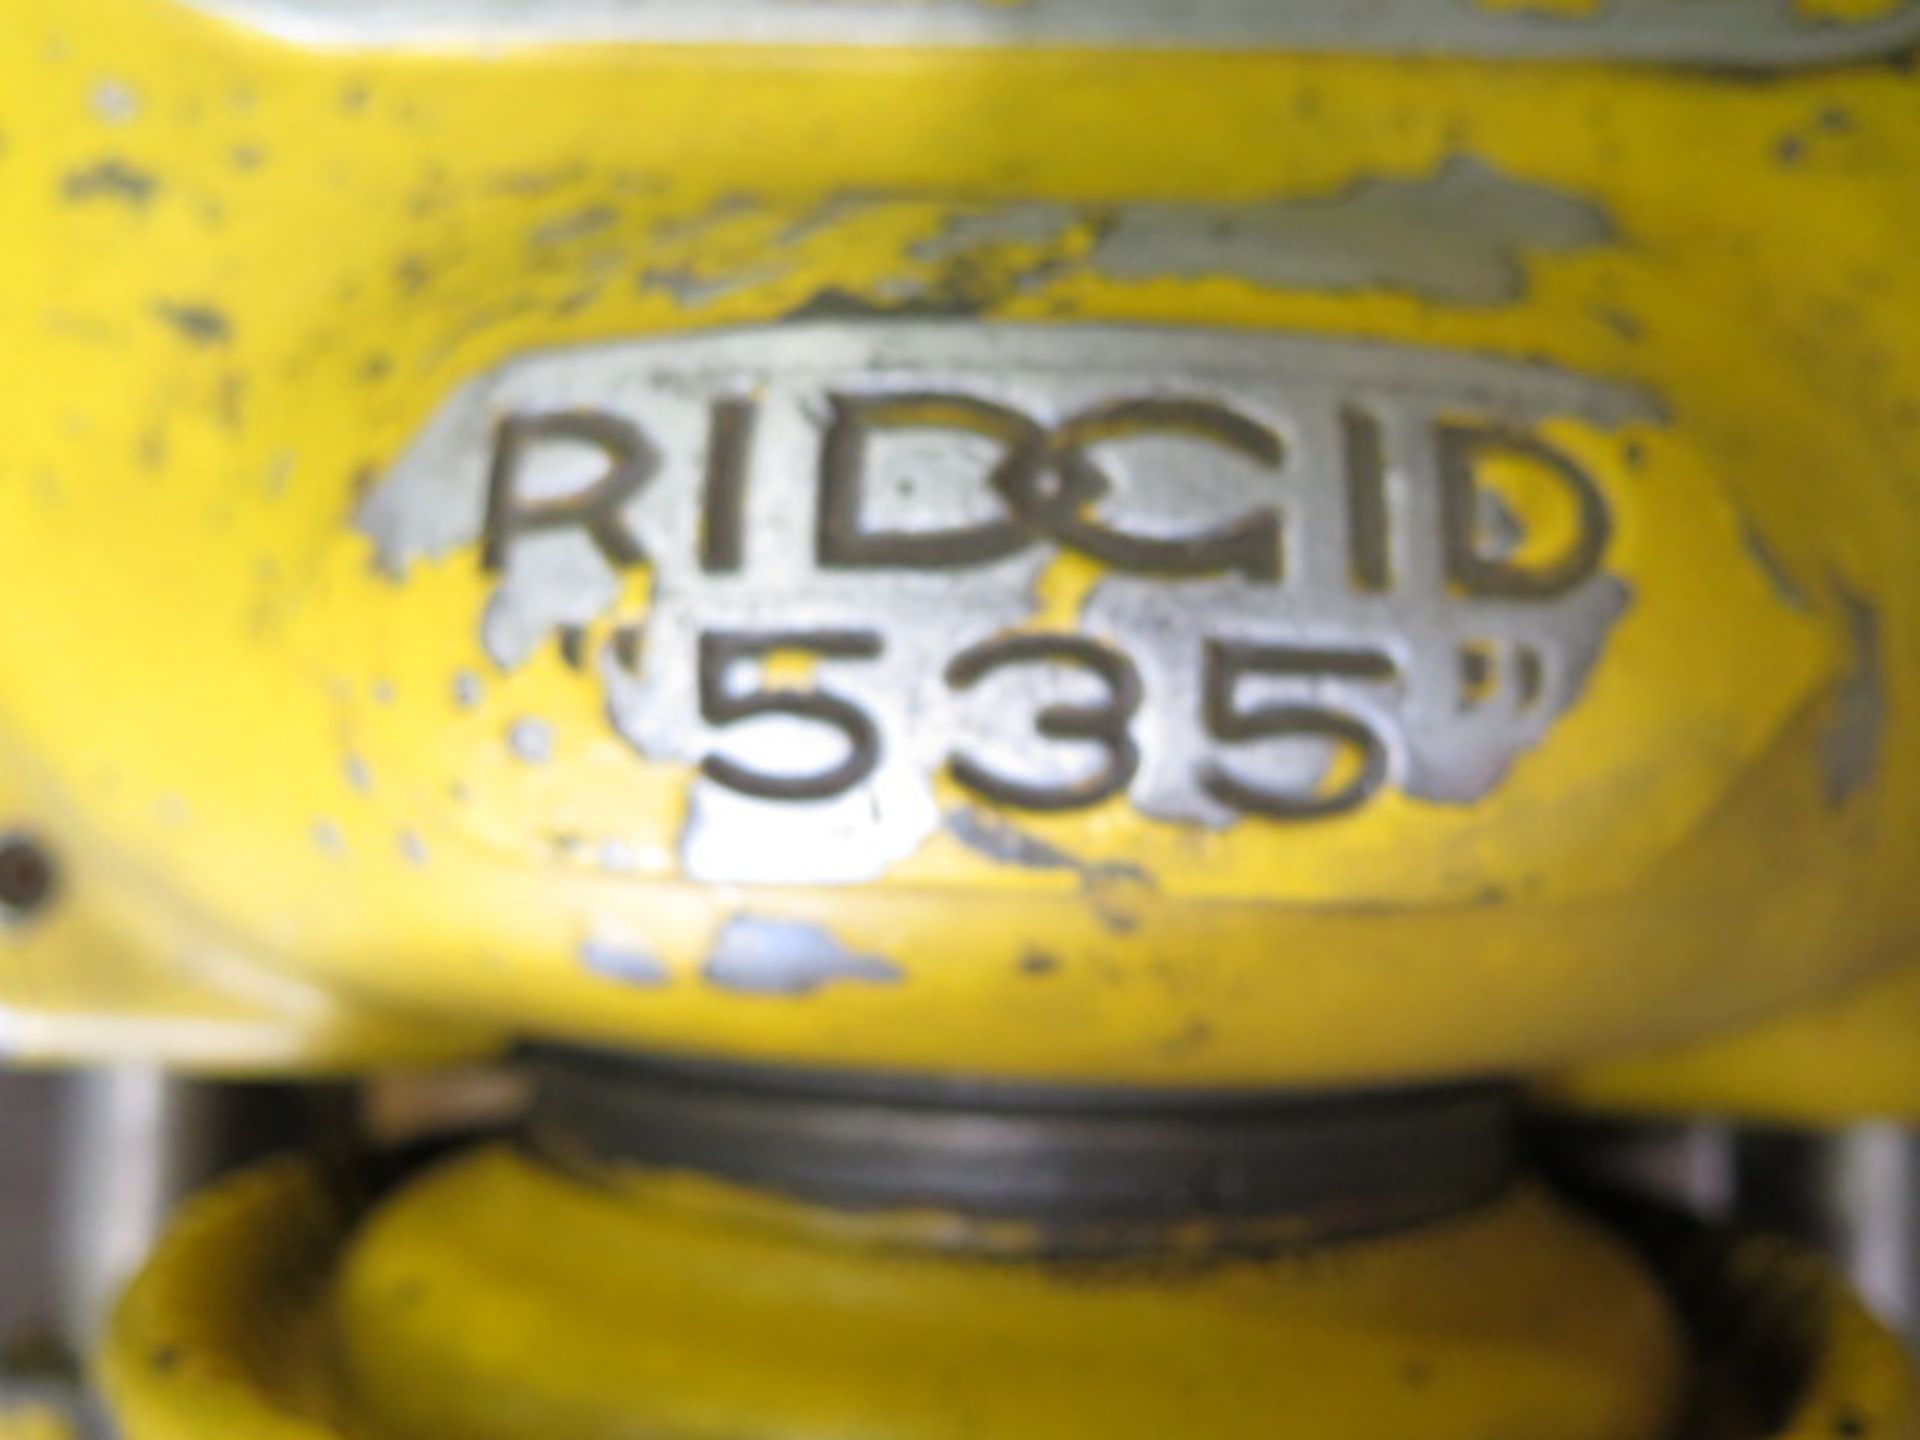 Ridgid 535 Power Pipe Threader w/ Die, Cutoff and Chamfer Tools (SOLD AS-IS - NO WARRANTY) - Image 4 of 4